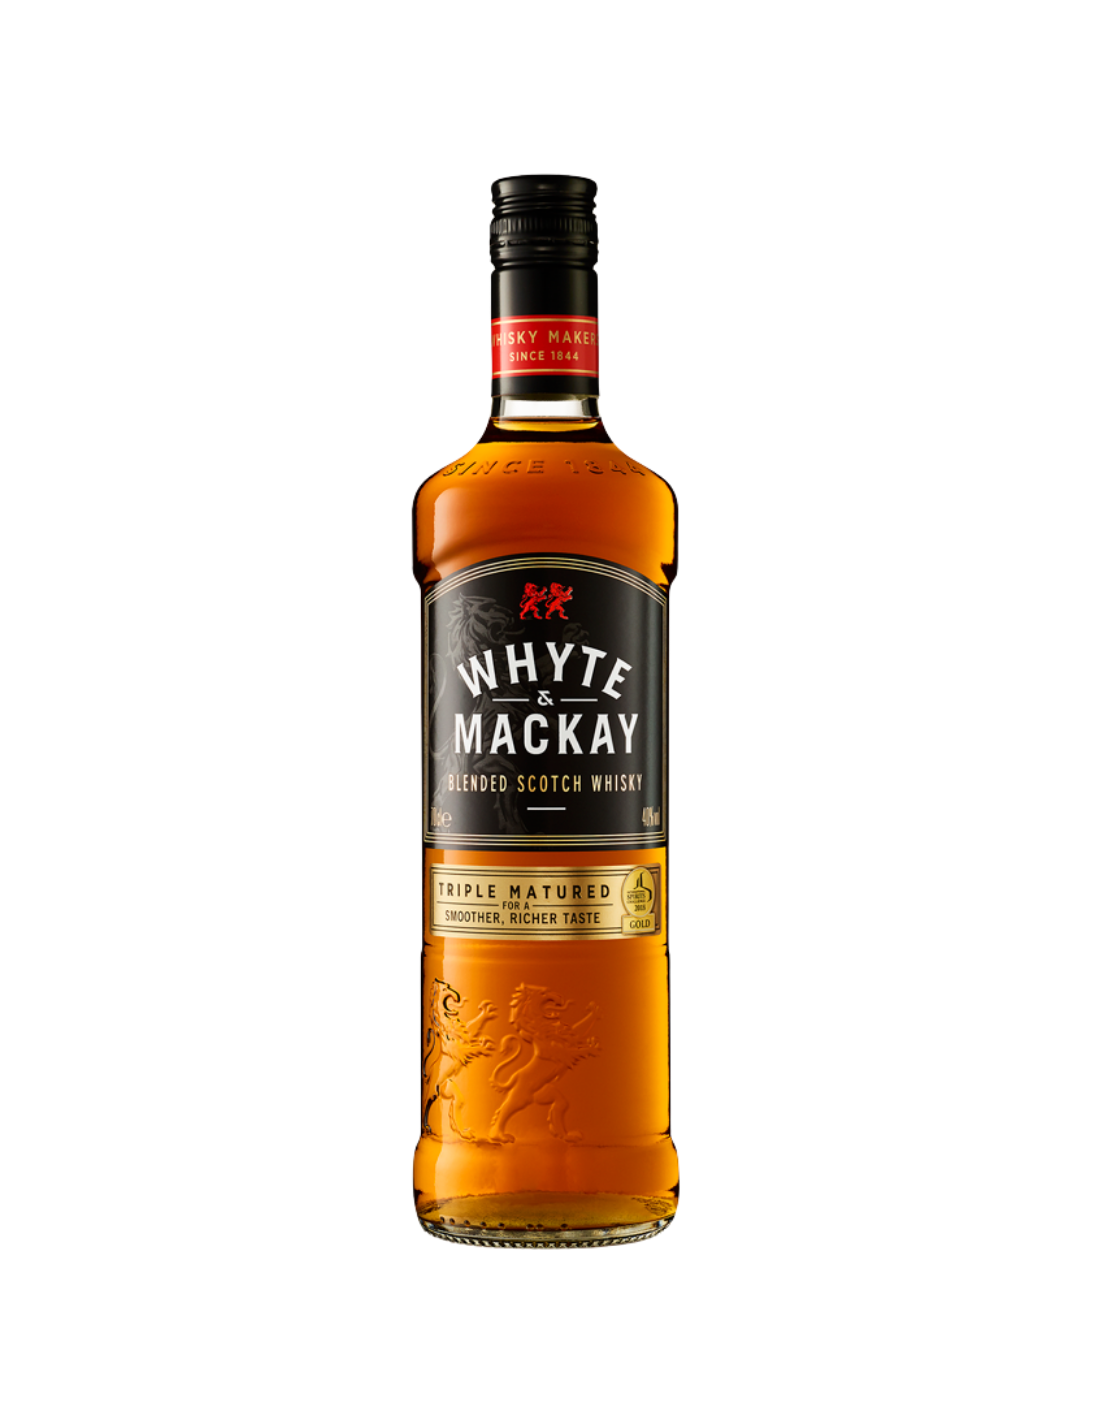 Whisky Whyte & Mackay Special, 1L, 40% alc., Scotia alcooldiscount.ro